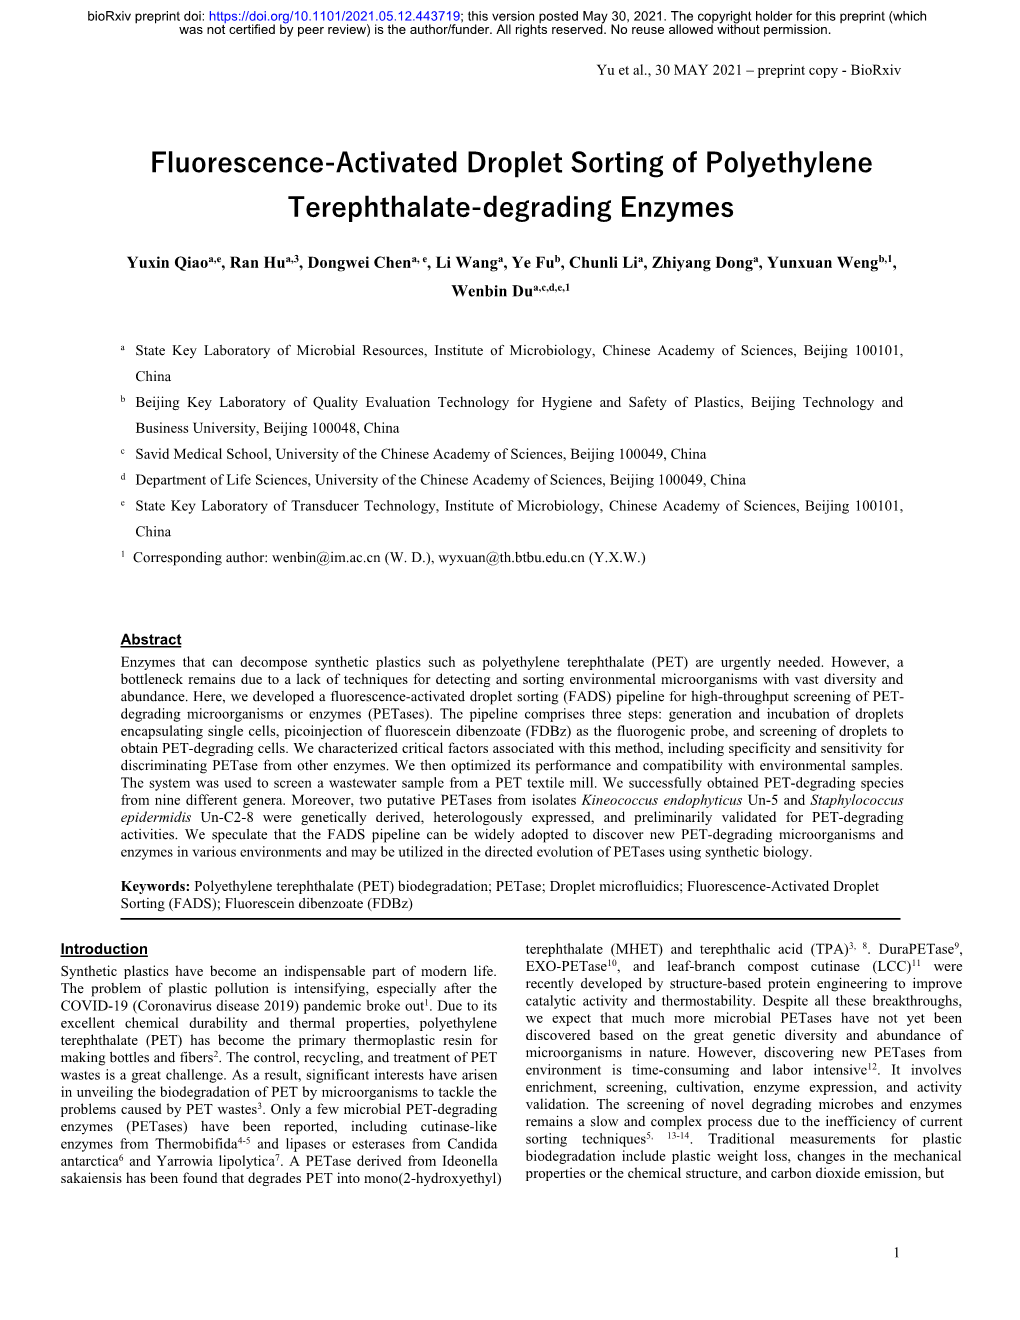 Fluorescence-Activated Droplet Sorting of Polyethylene Terephthalate-Degrading Enzymes